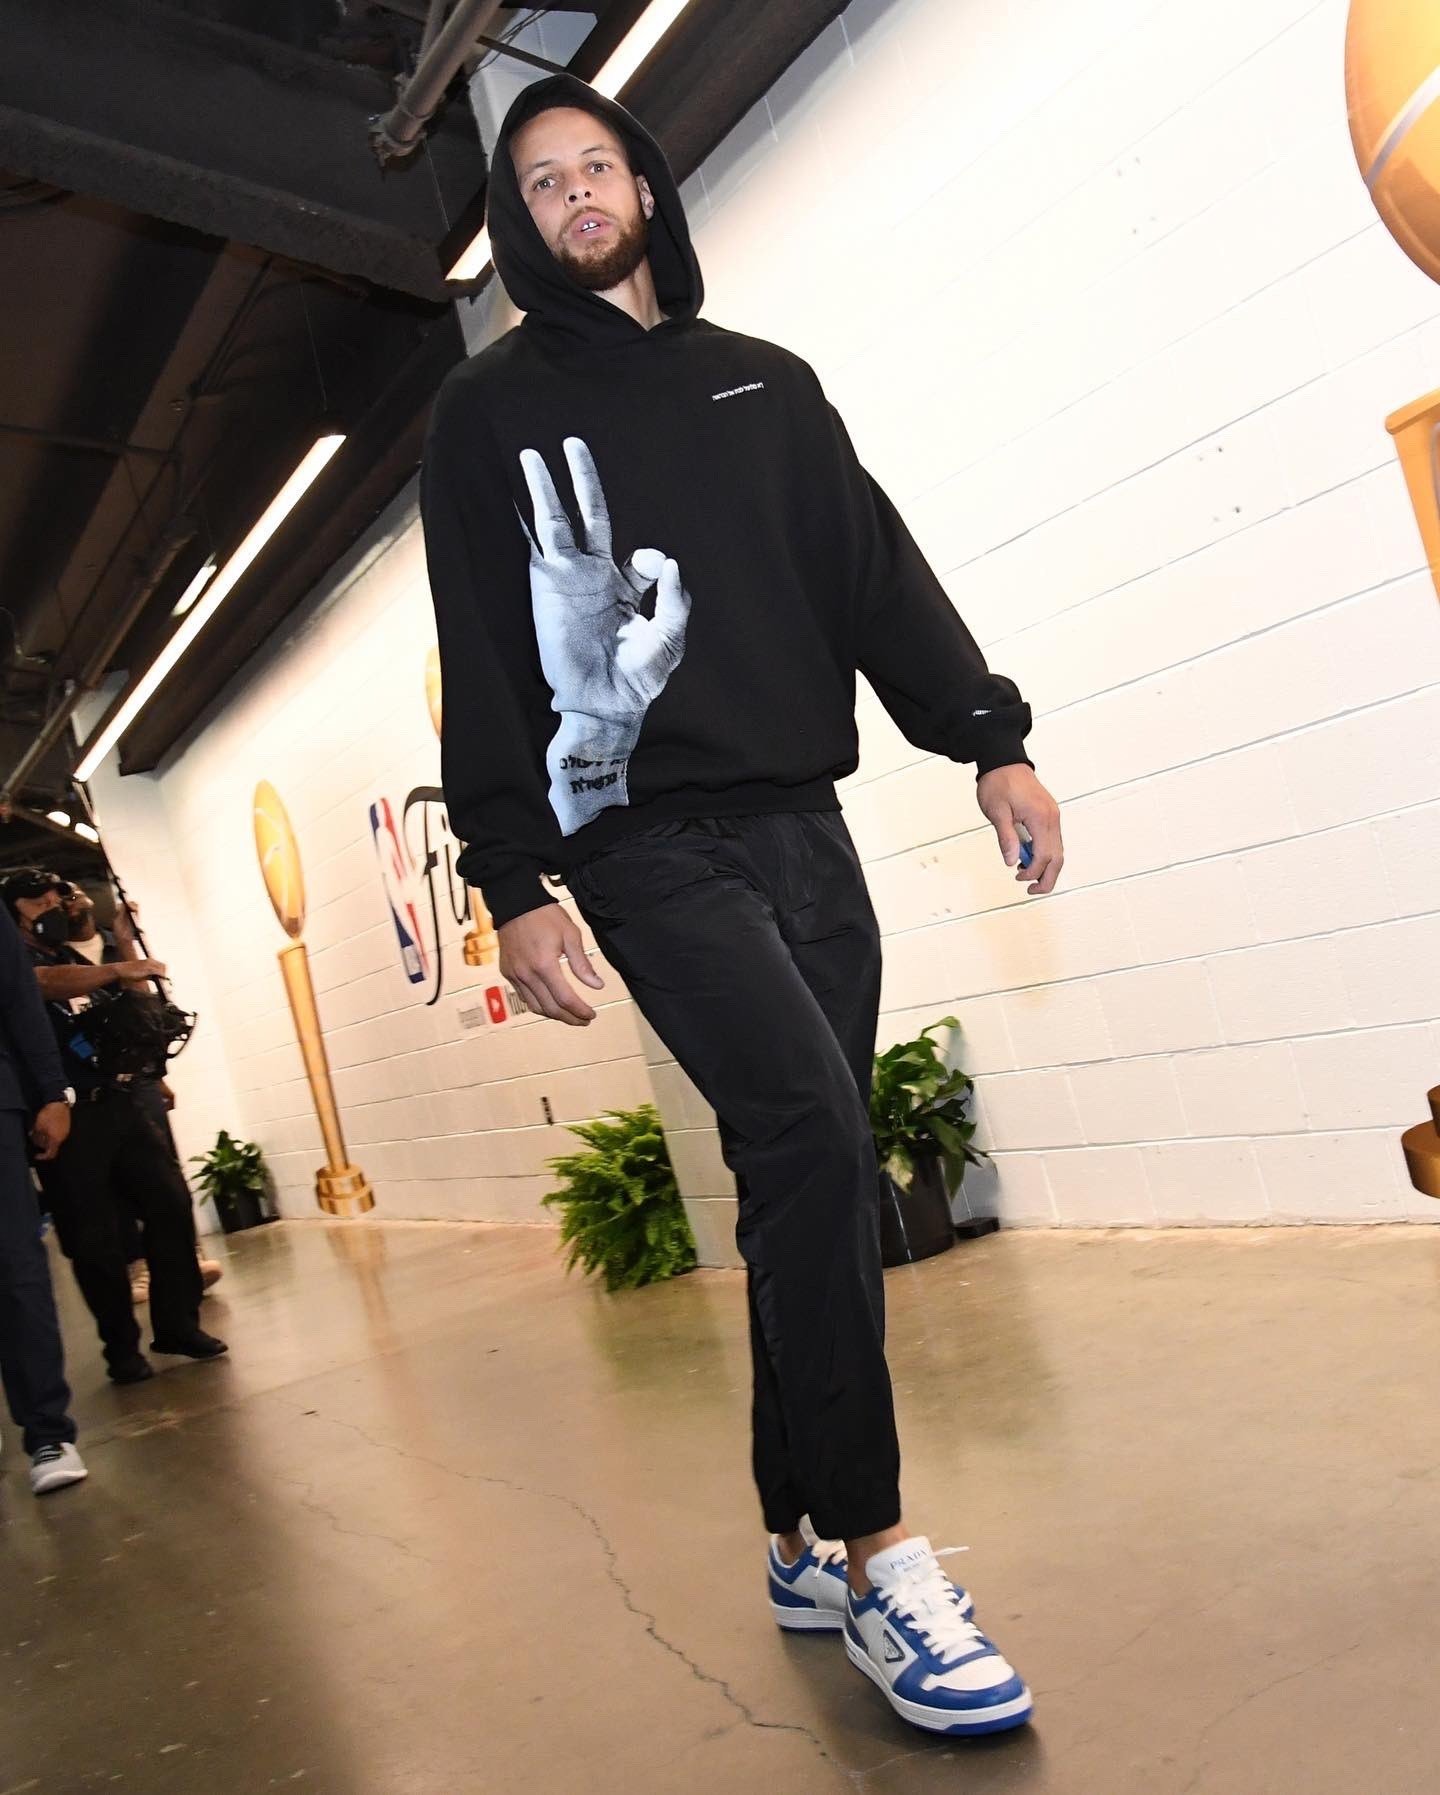 leggings stephen curry outfit basketball